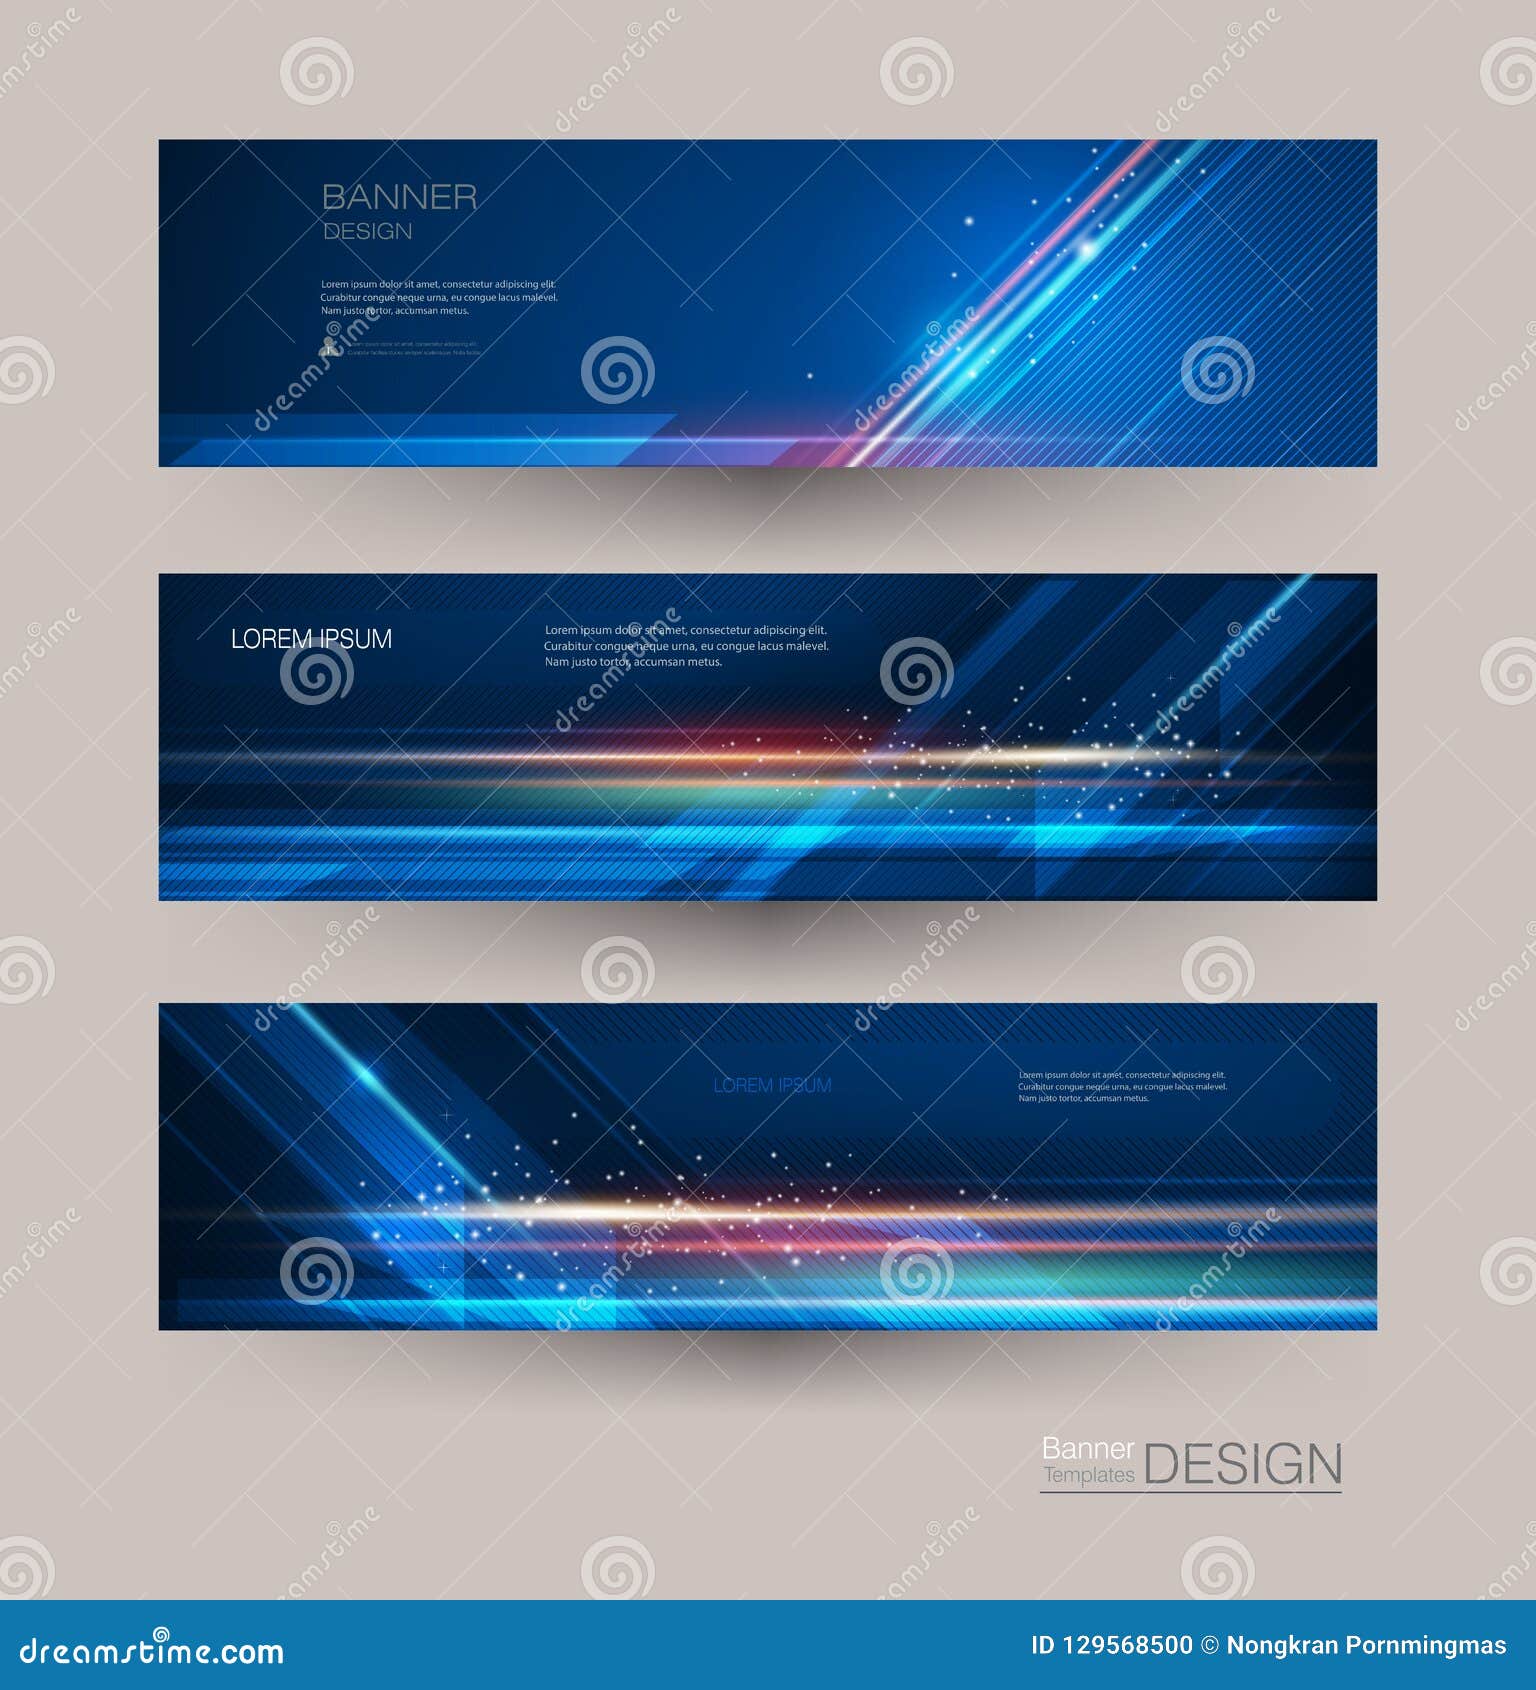 abstract banners set with image of speed movement pattern and motion blur over dark blue color.